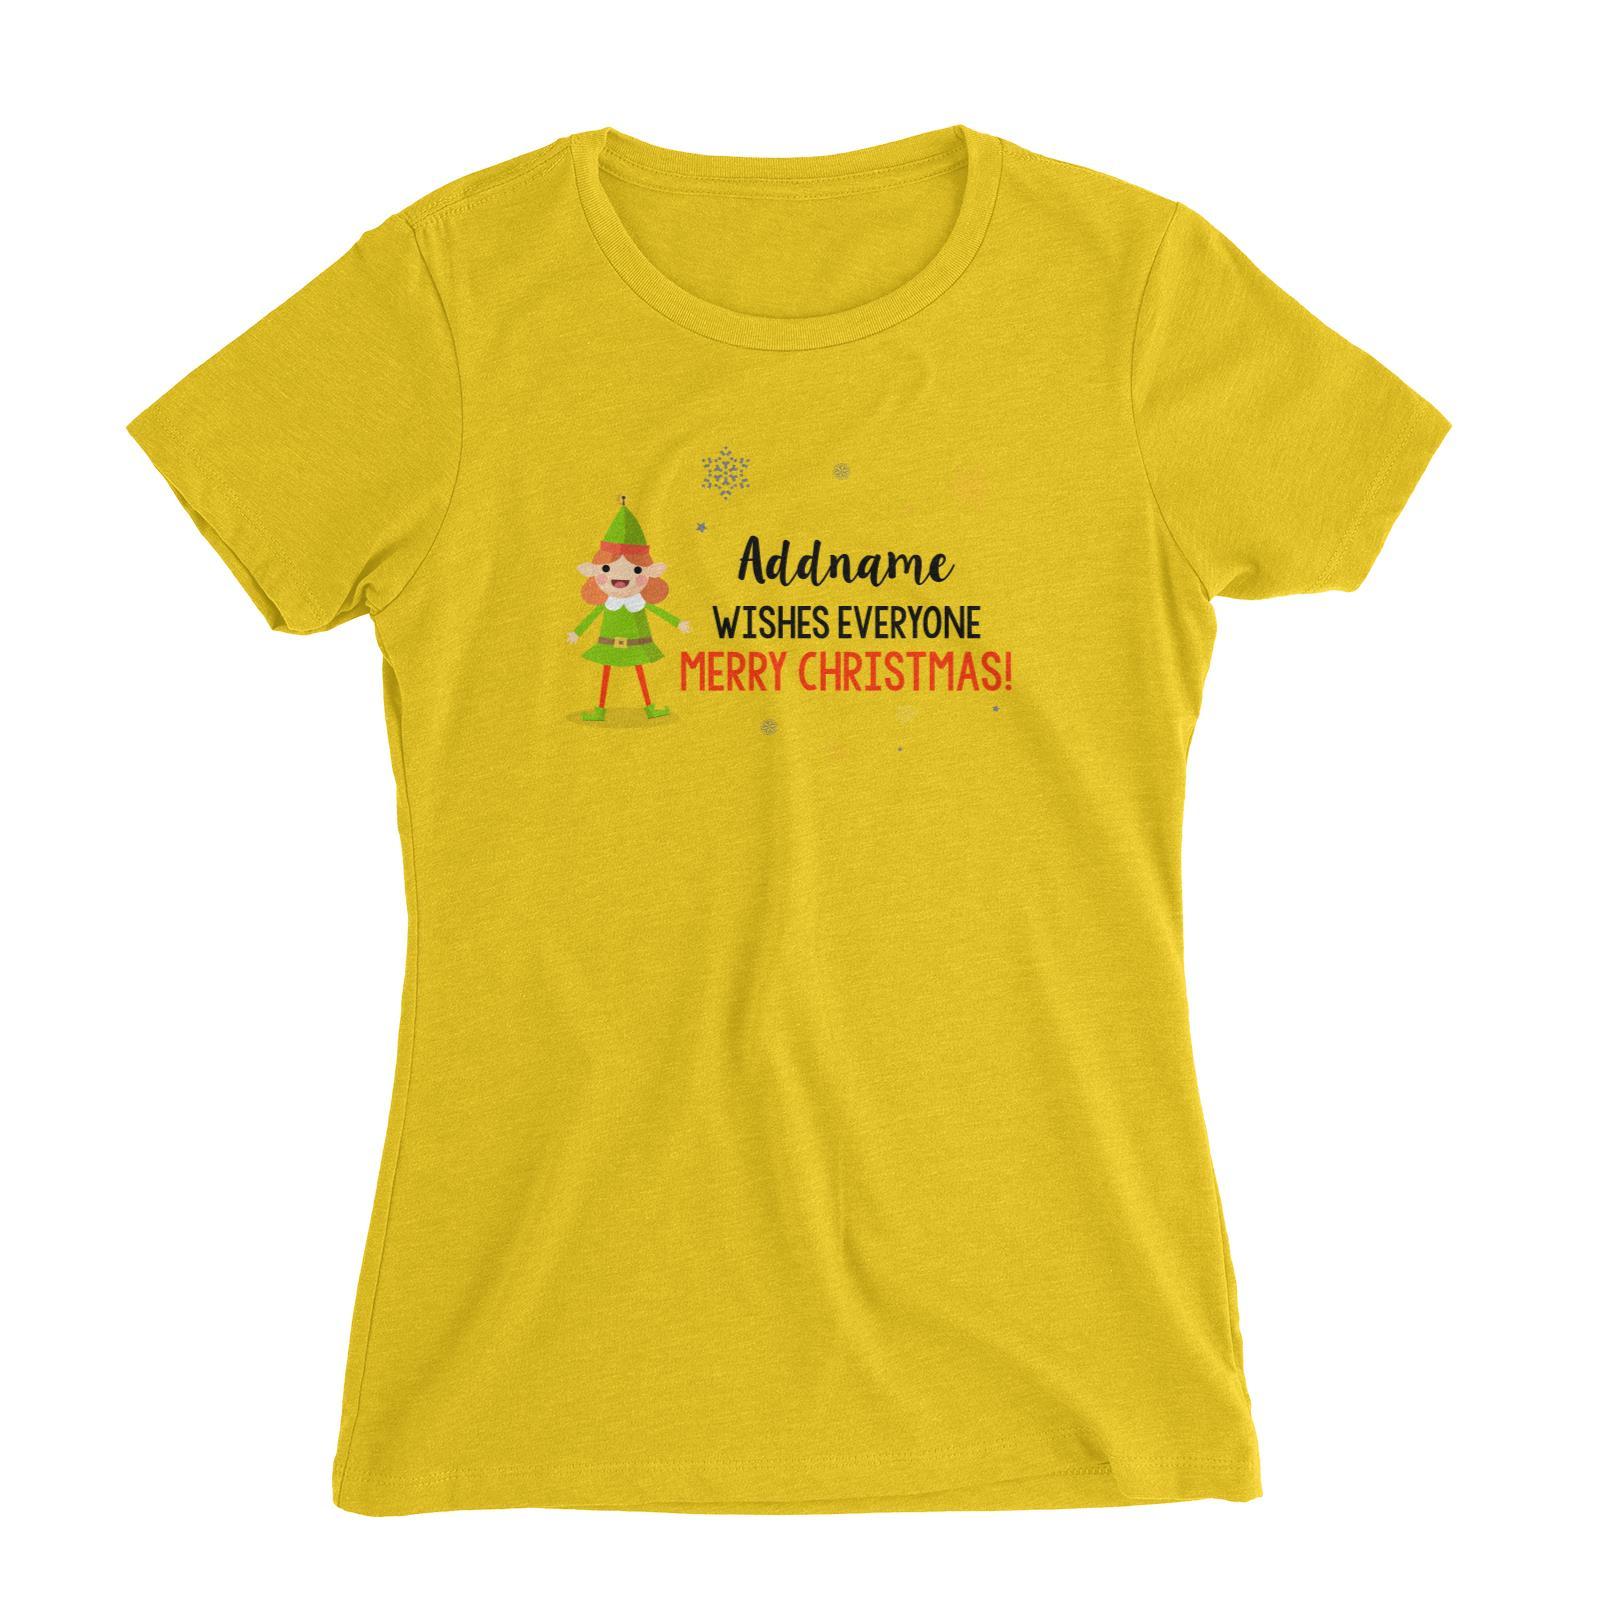 Cute Elf Girl Wishes Evryone Merry Christmas Addname Women's Slim Fit T-Shirt  Matching Family Personalizable Designs